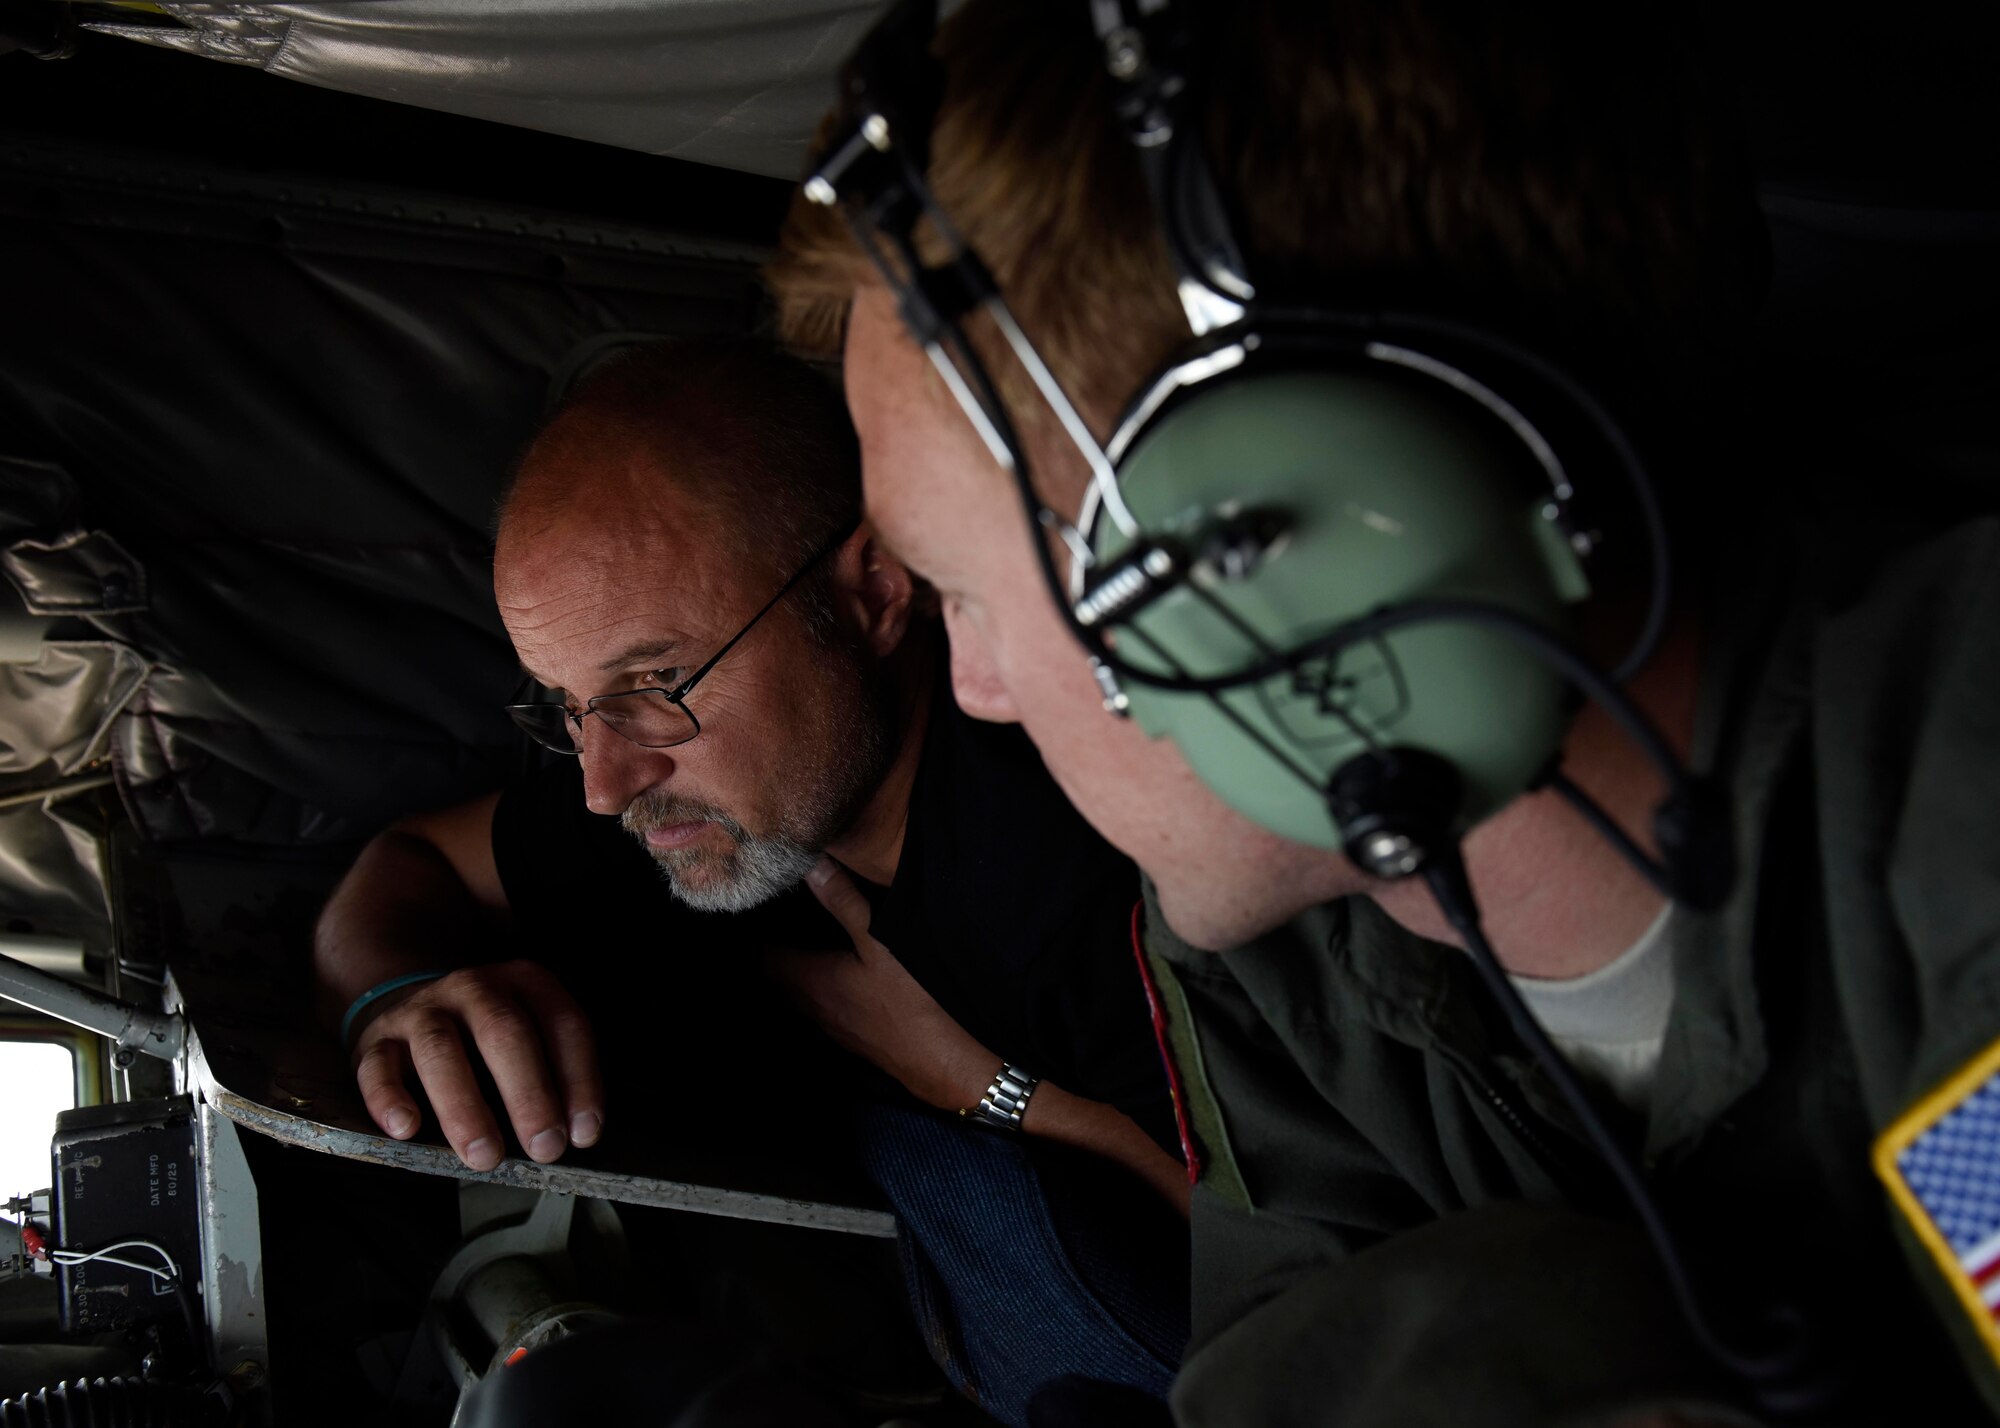 Airman 1st Class Conner O’Connell, 93rd Air Refueling Squadron boom operator, explains how a KC-135 Stratotanker boom works to Marcus Morgan, Reardon School District superintendent, during an orientation flight at Fairchild Air Force Base, Washington, July 18, 2018. This year marks the 60th year the KC-135 has been at Fairchild Air Force Base. With nearly 155 KC-135s assigned to active-duty and more than 170 assigned to the Air National Guard, Fairchild’s 44 birds make it the largest tanker fleet in the world.